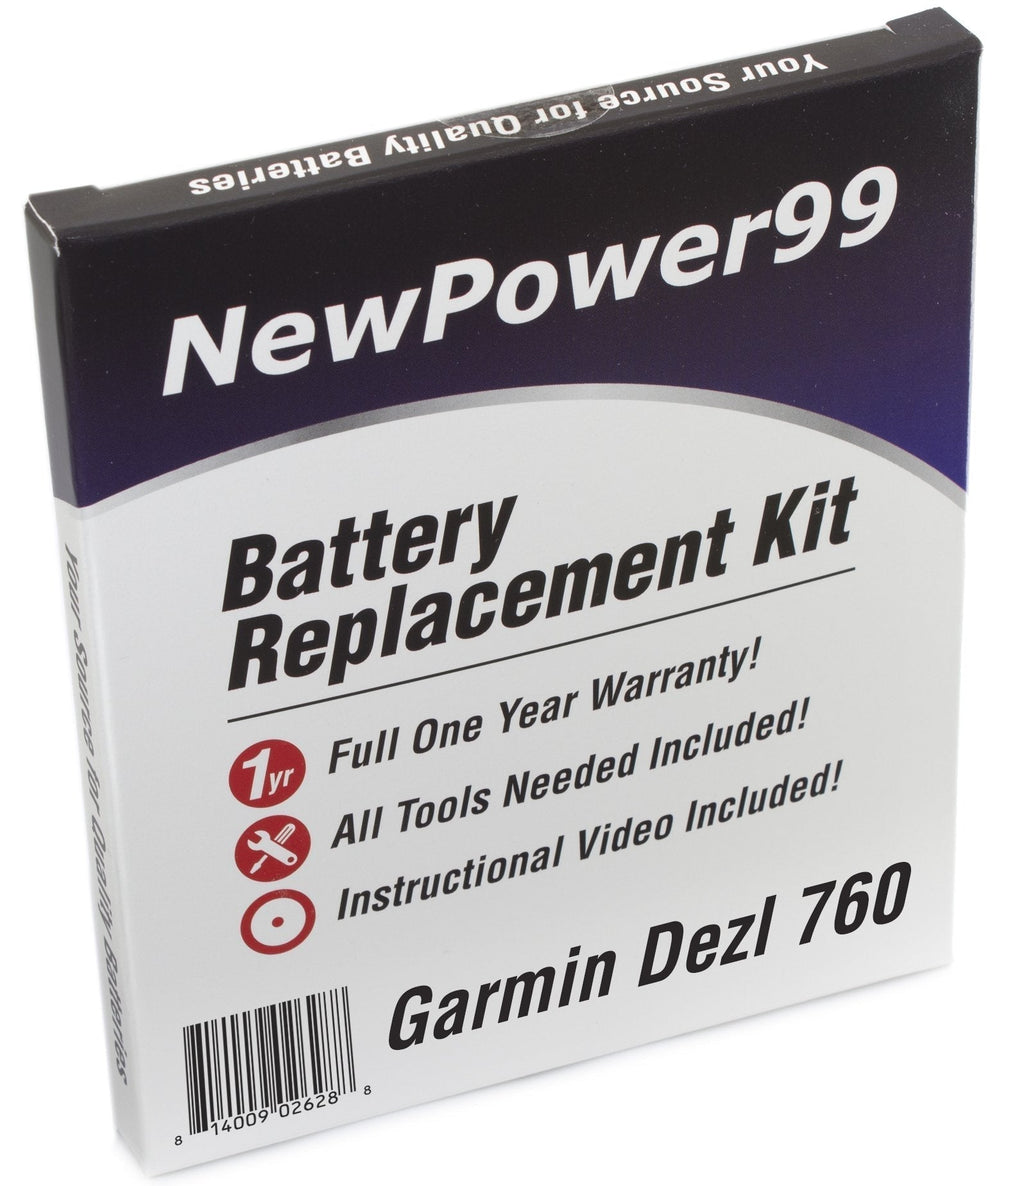  [AUSTRALIA] - Battery Kit for Garmin Dezl 760, 760LM, 760LMT with Video, Tools and Battery from NewPower99